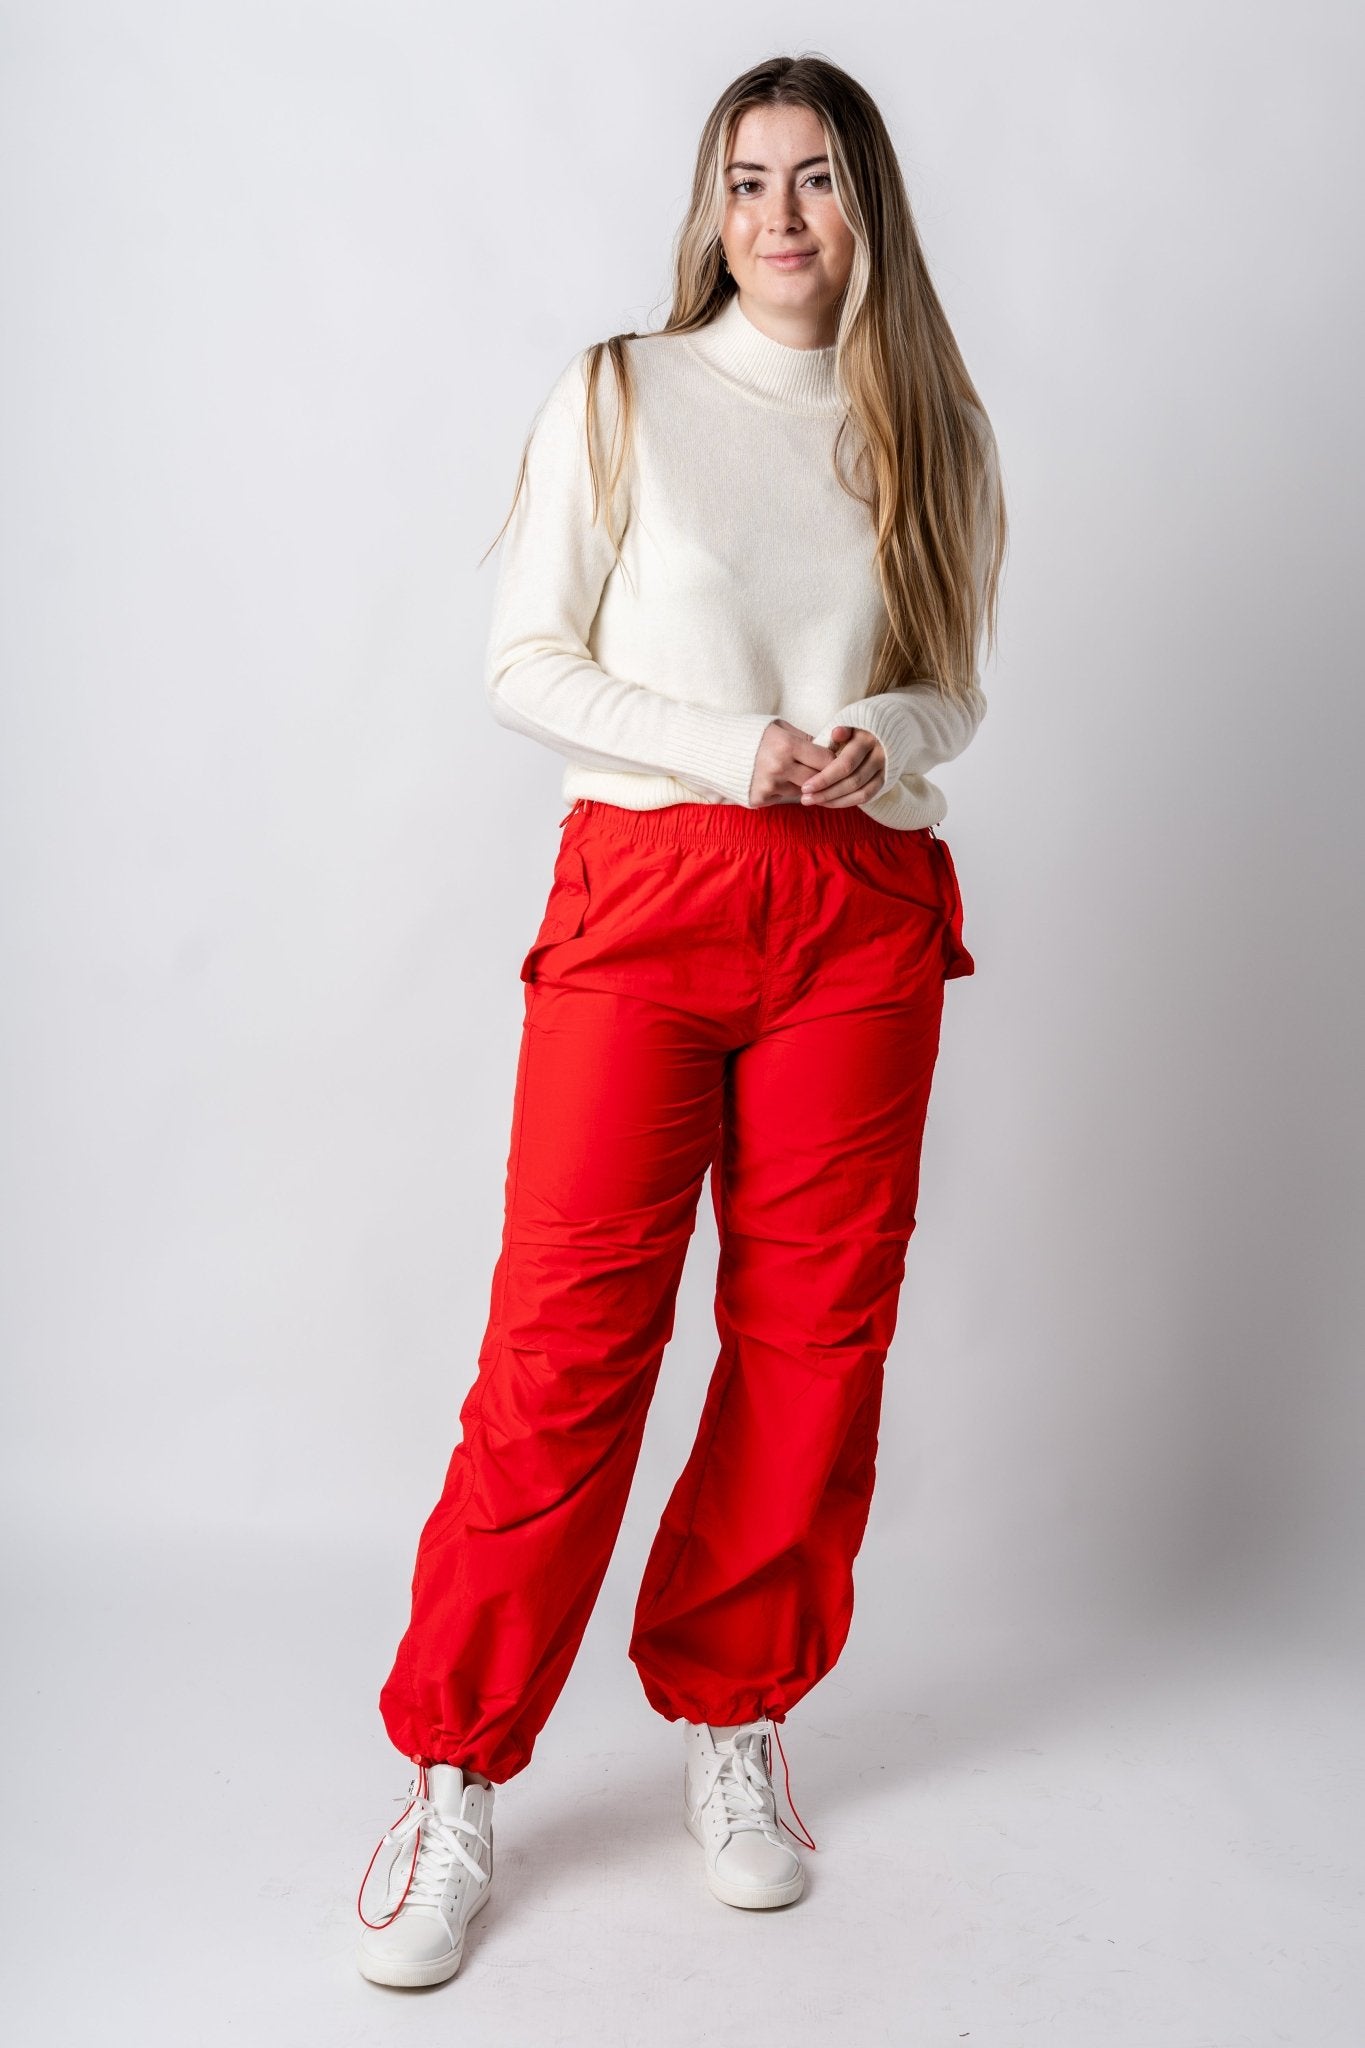 Ruched cargo pants tomato red | Lush Fashion Lounge: women's boutique pants, boutique women's pants, affordable boutique pants, women's fashion pants